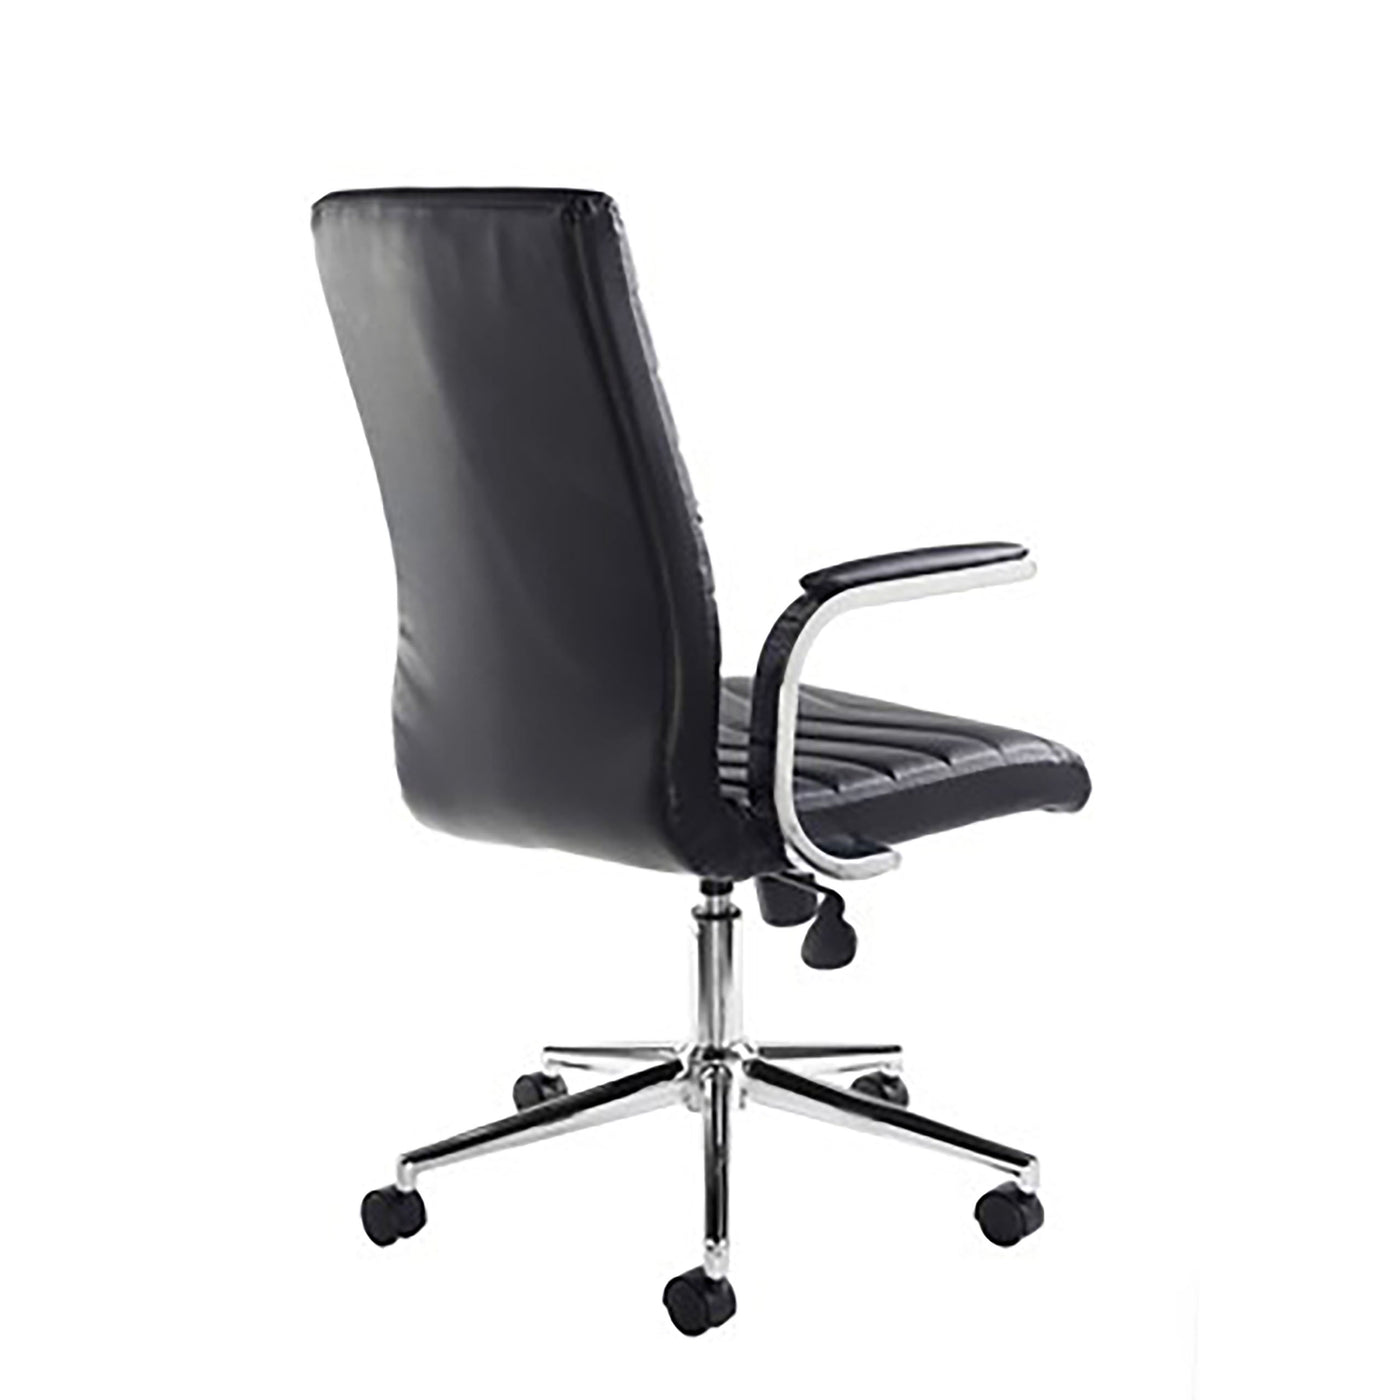 Martinez Home Office Chair | Home Office Furniture | Office Seating | Black Faux Leather Chair